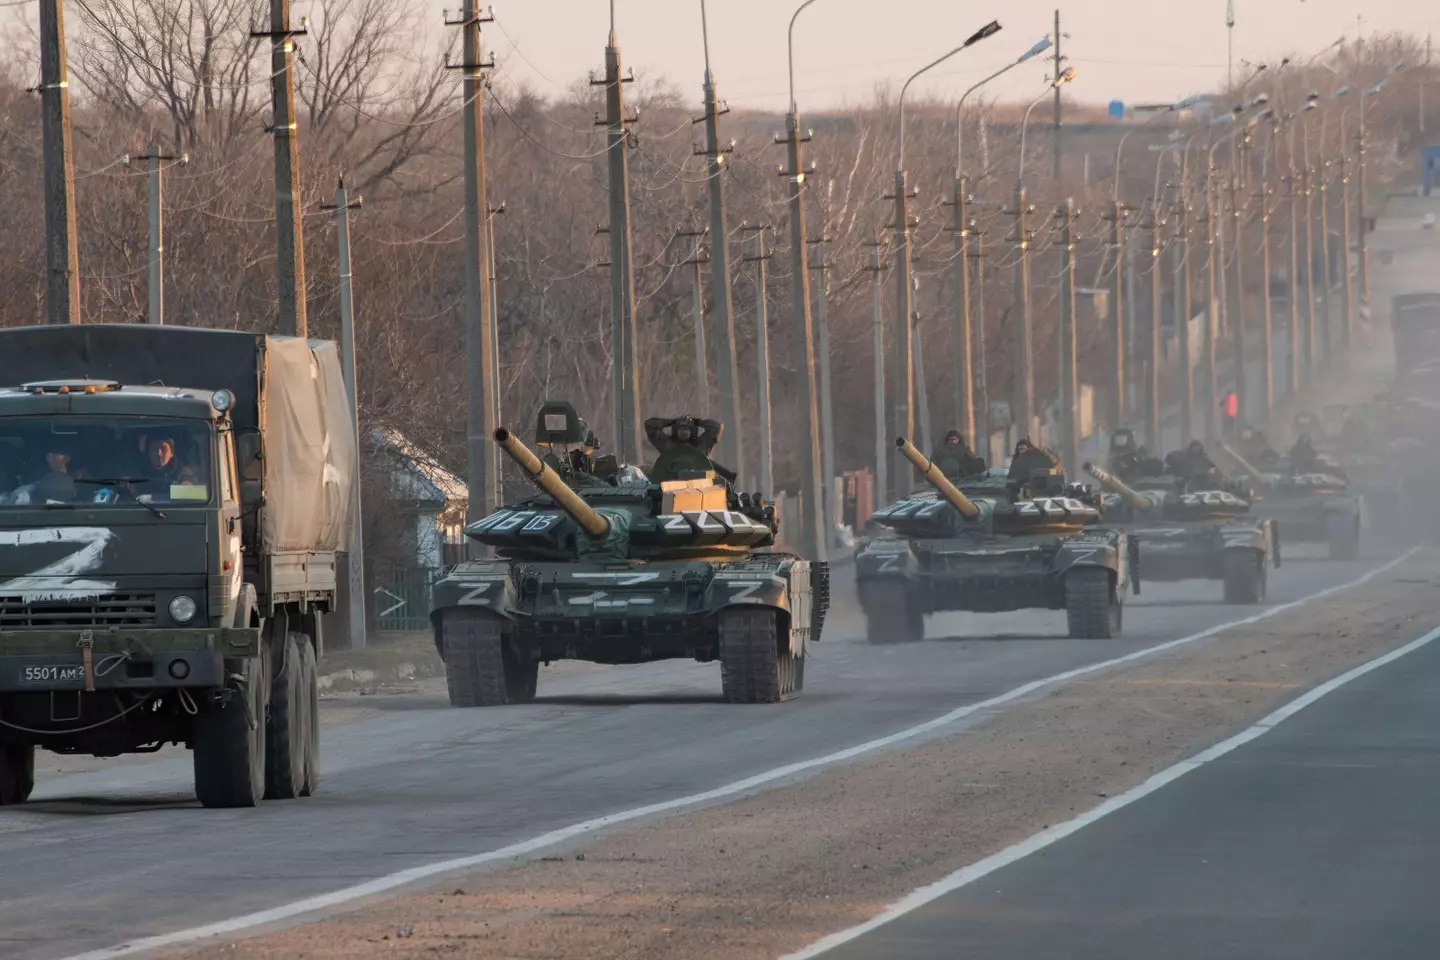 Russian troops have be surrendering to Ukrainian forces.